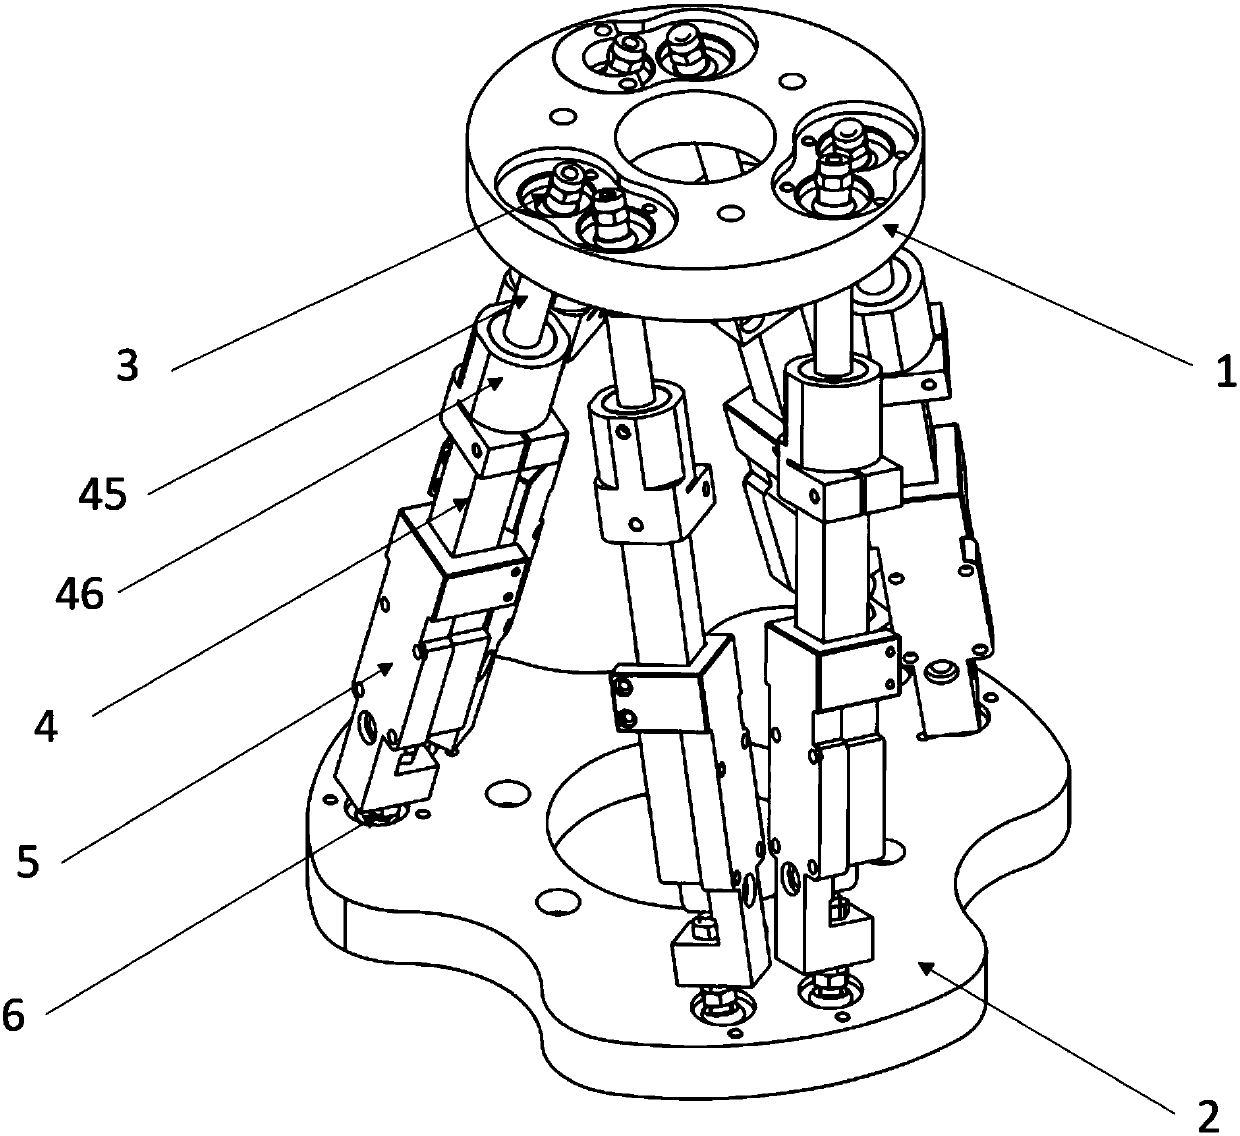 Six-freedom-degree parallel robot